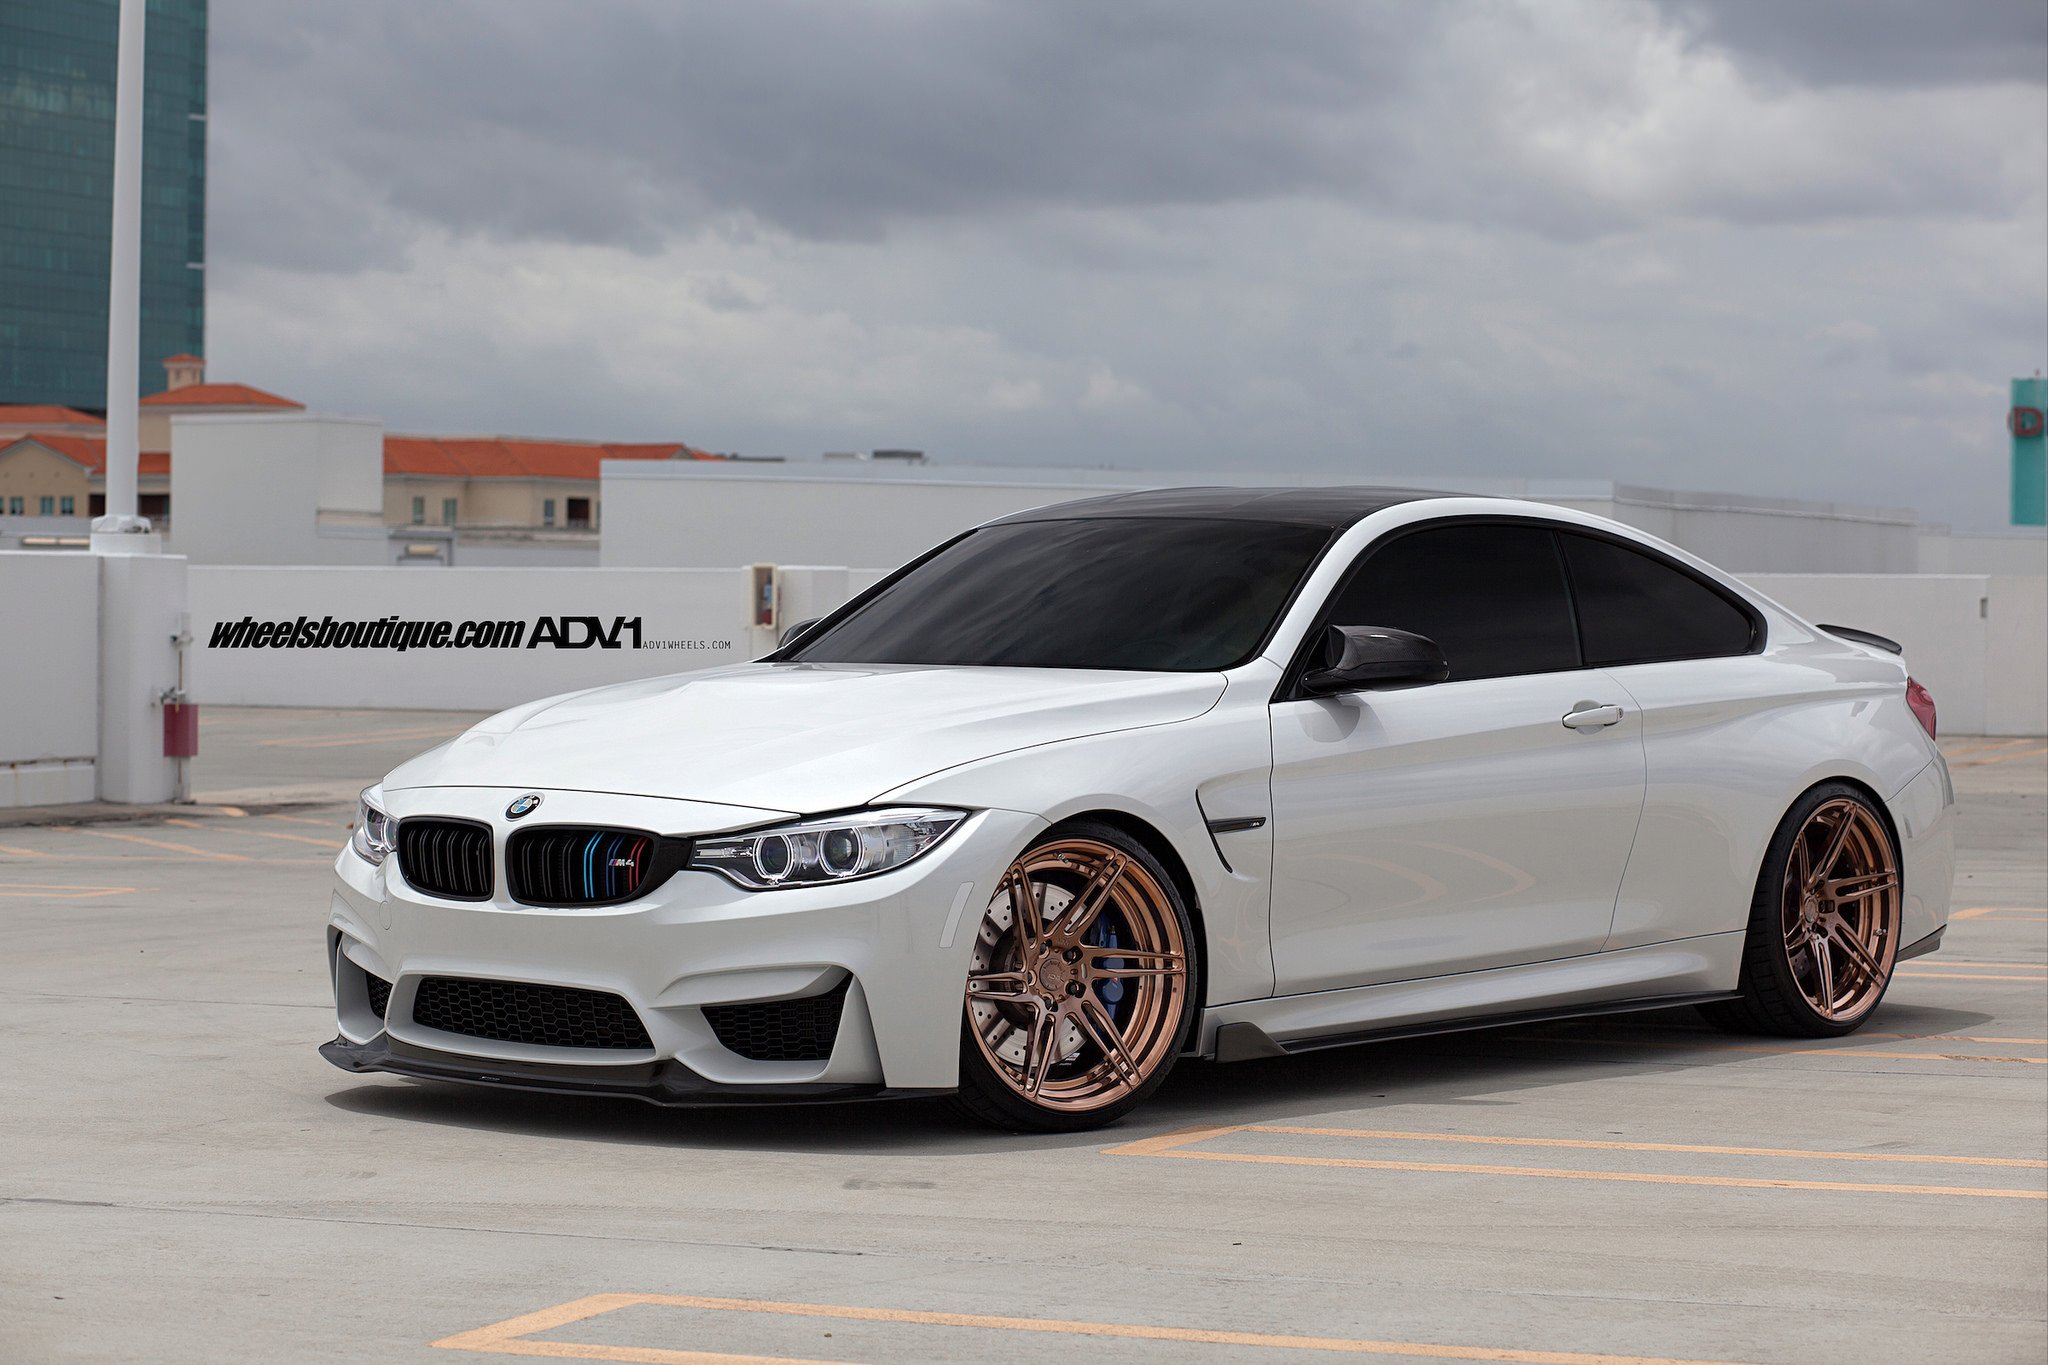 aristo, Forged, Wheels, Bmw, M4, Coupe, Cars Wallpaper